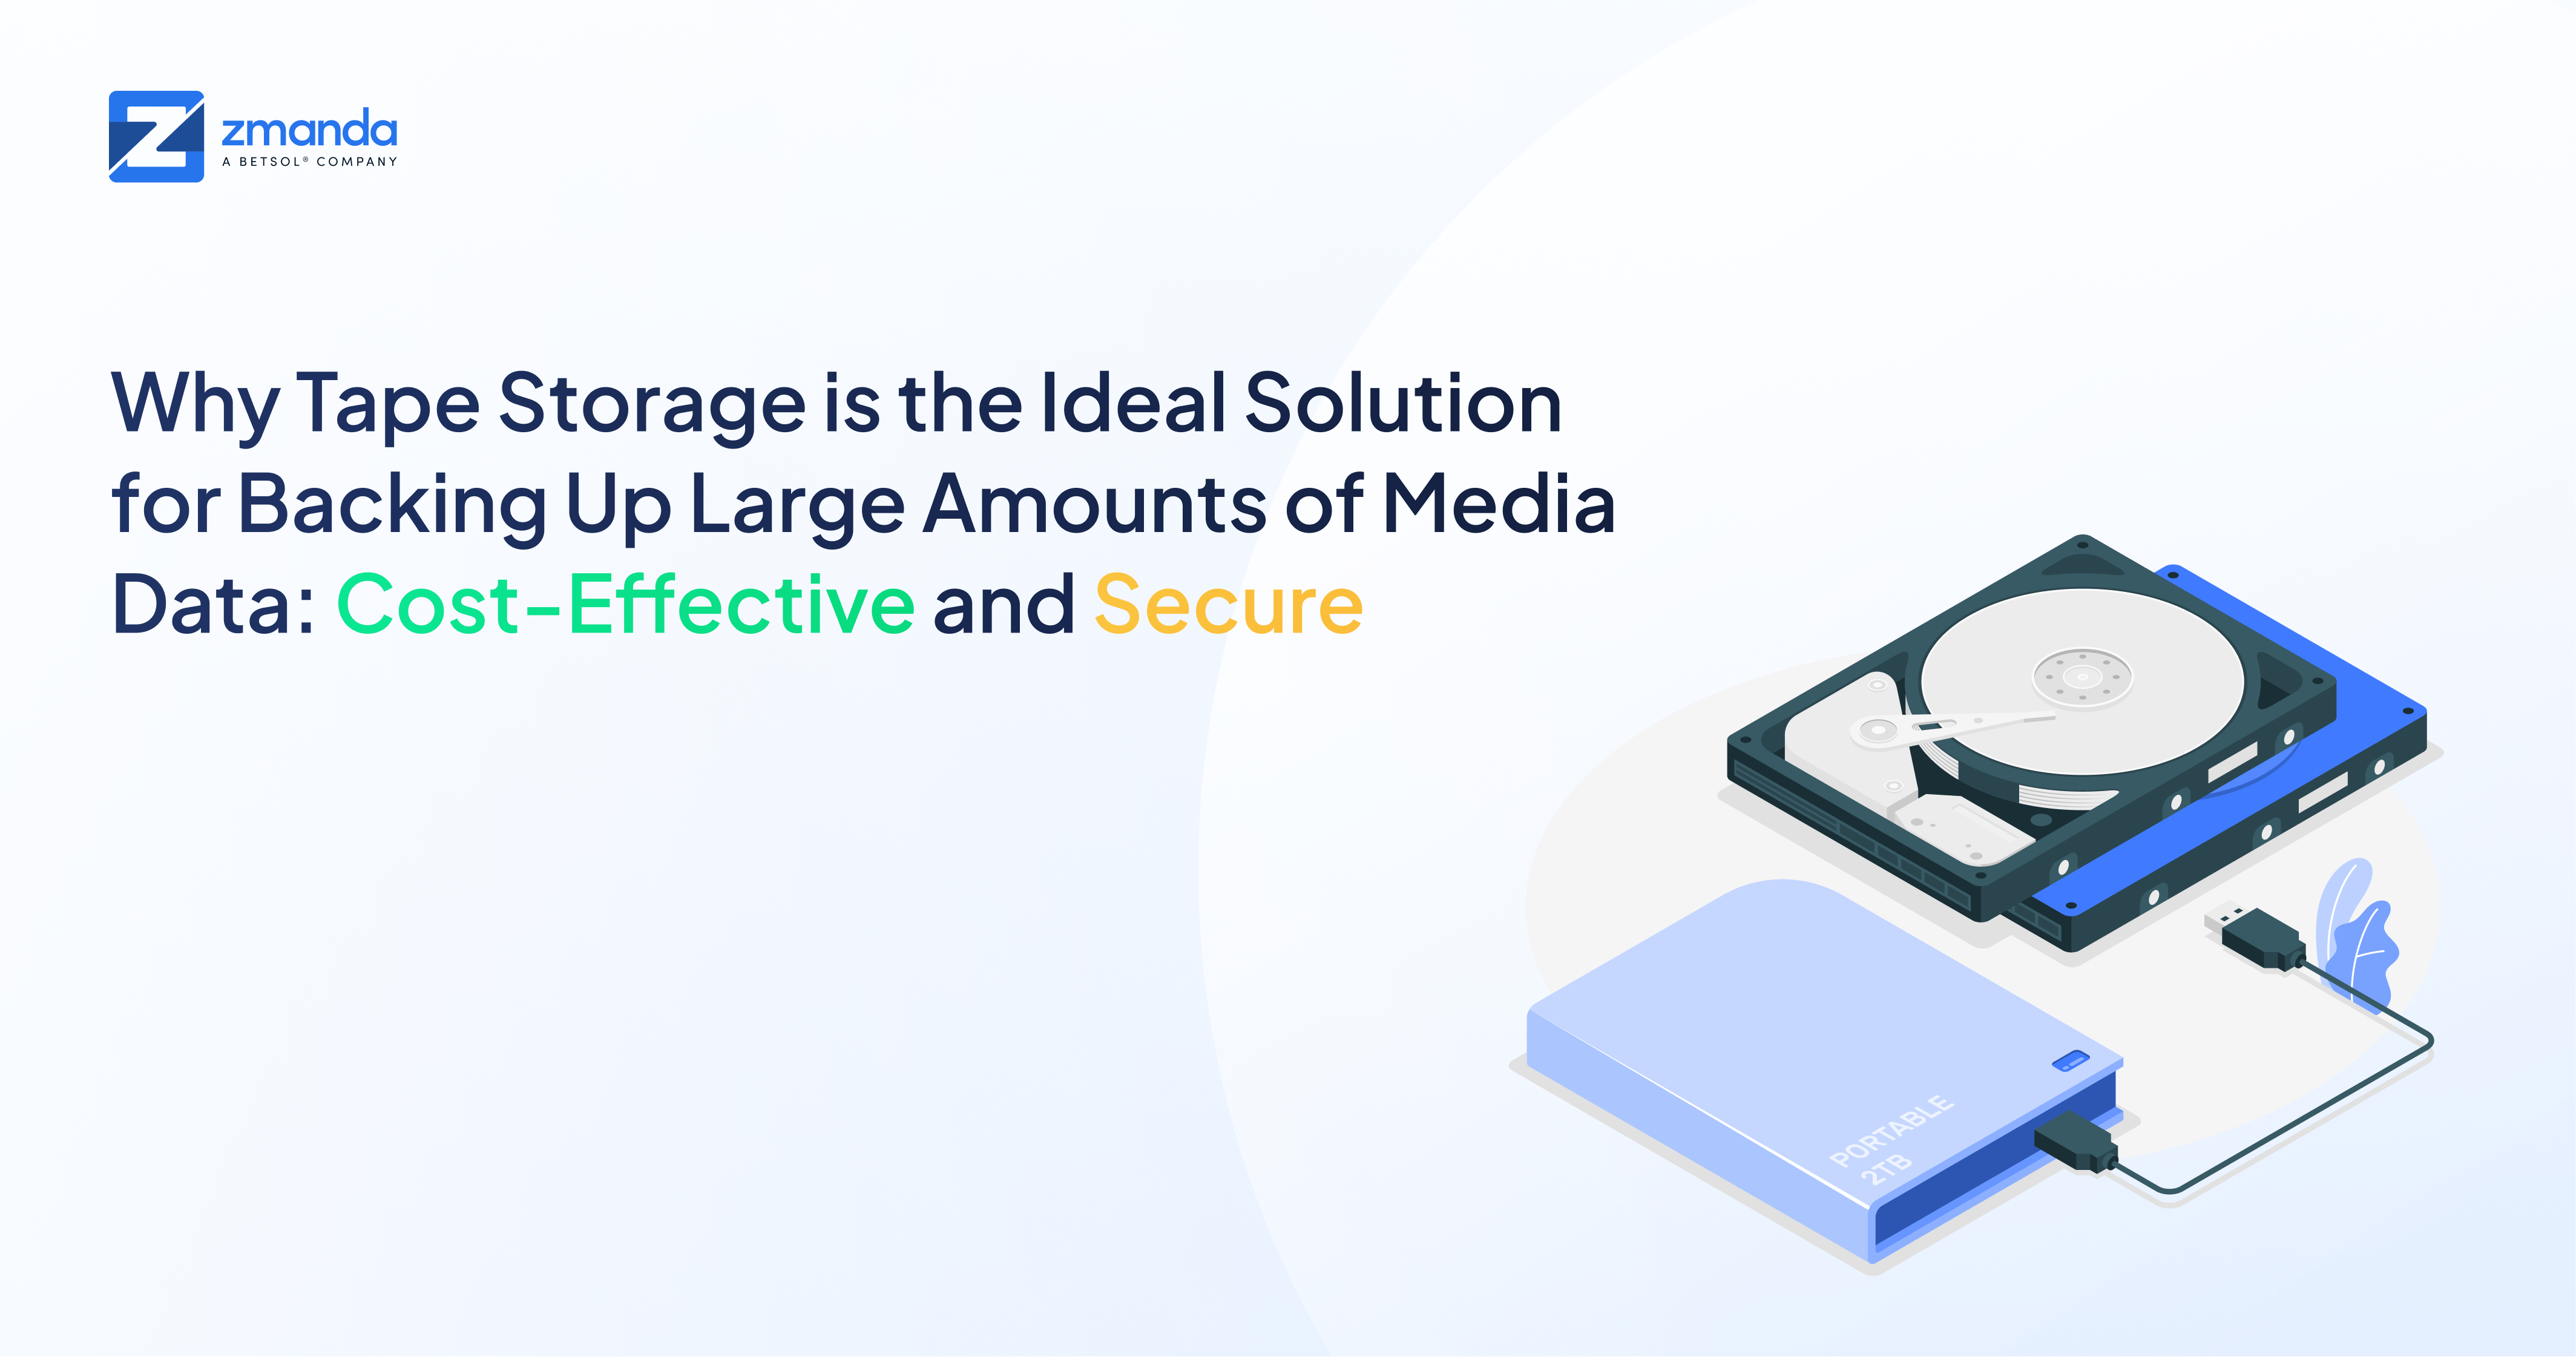 Why Tape Storage is the Ideal Solution for Backing Up Large Amounts of Media Data Cost-Effective and Secure